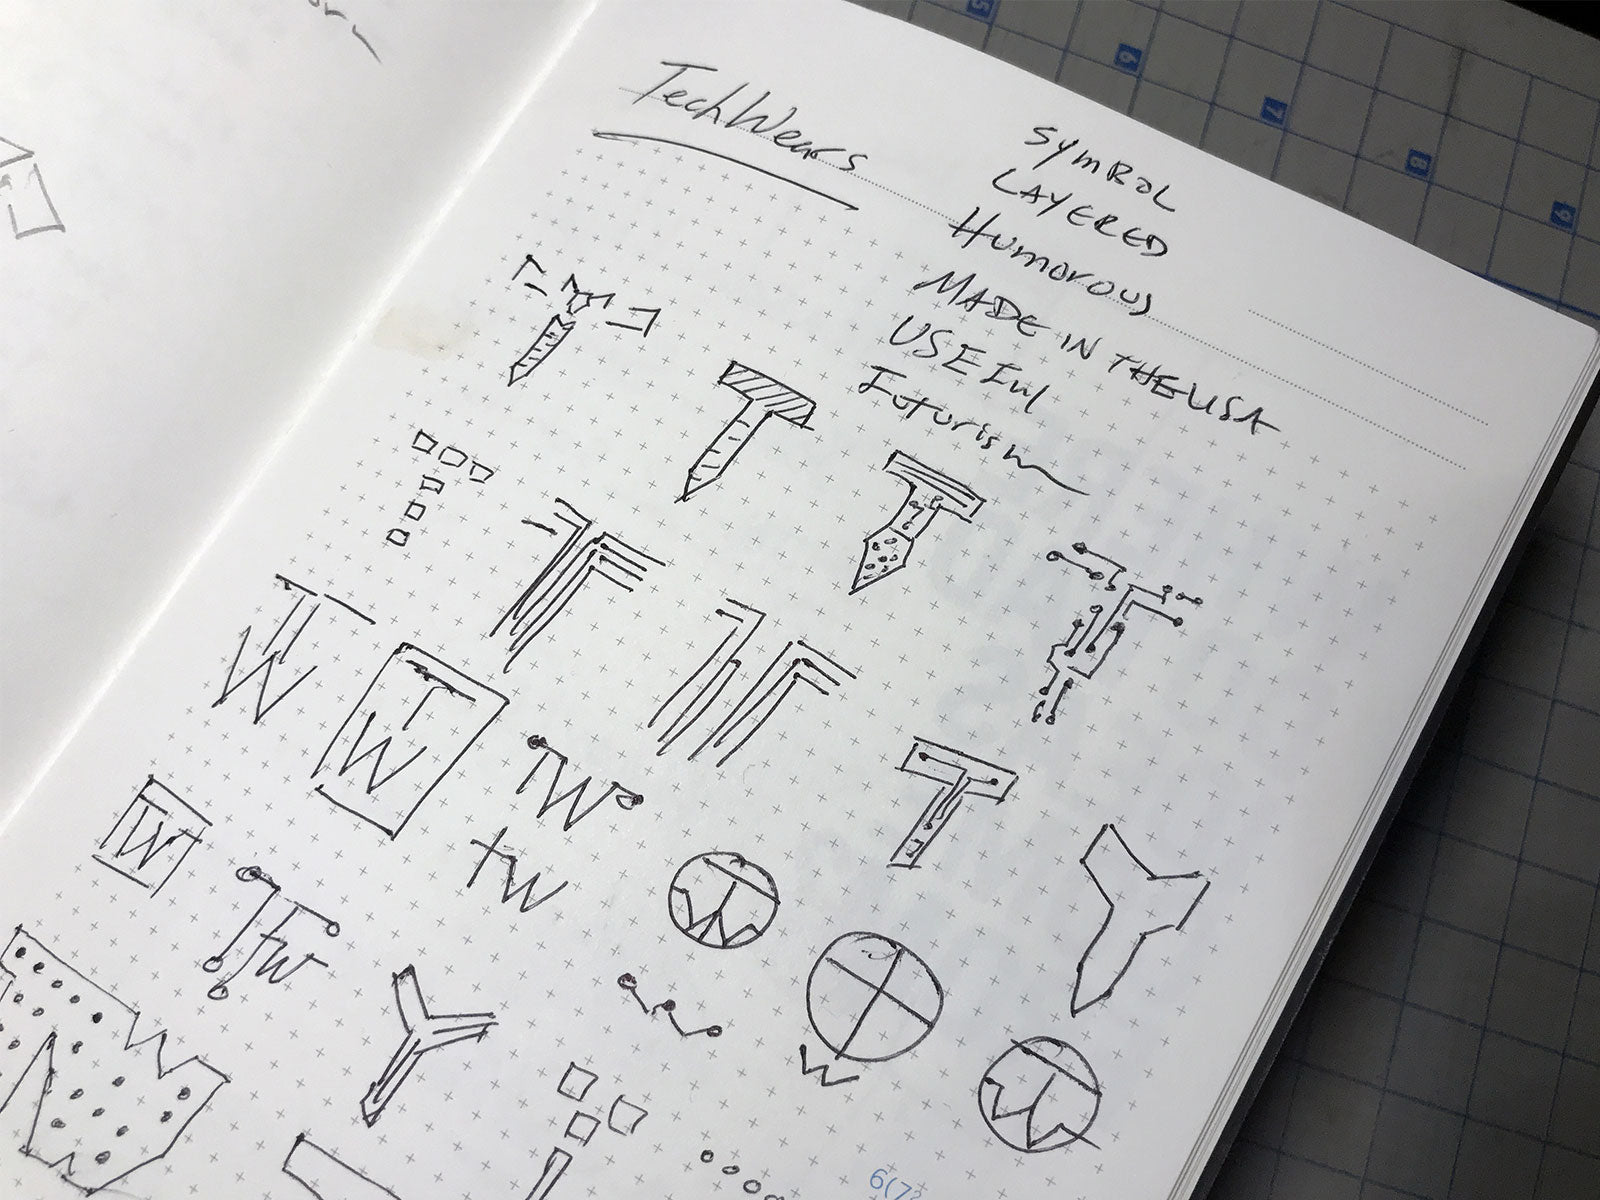 Initial sketches of TechWears logo redesign